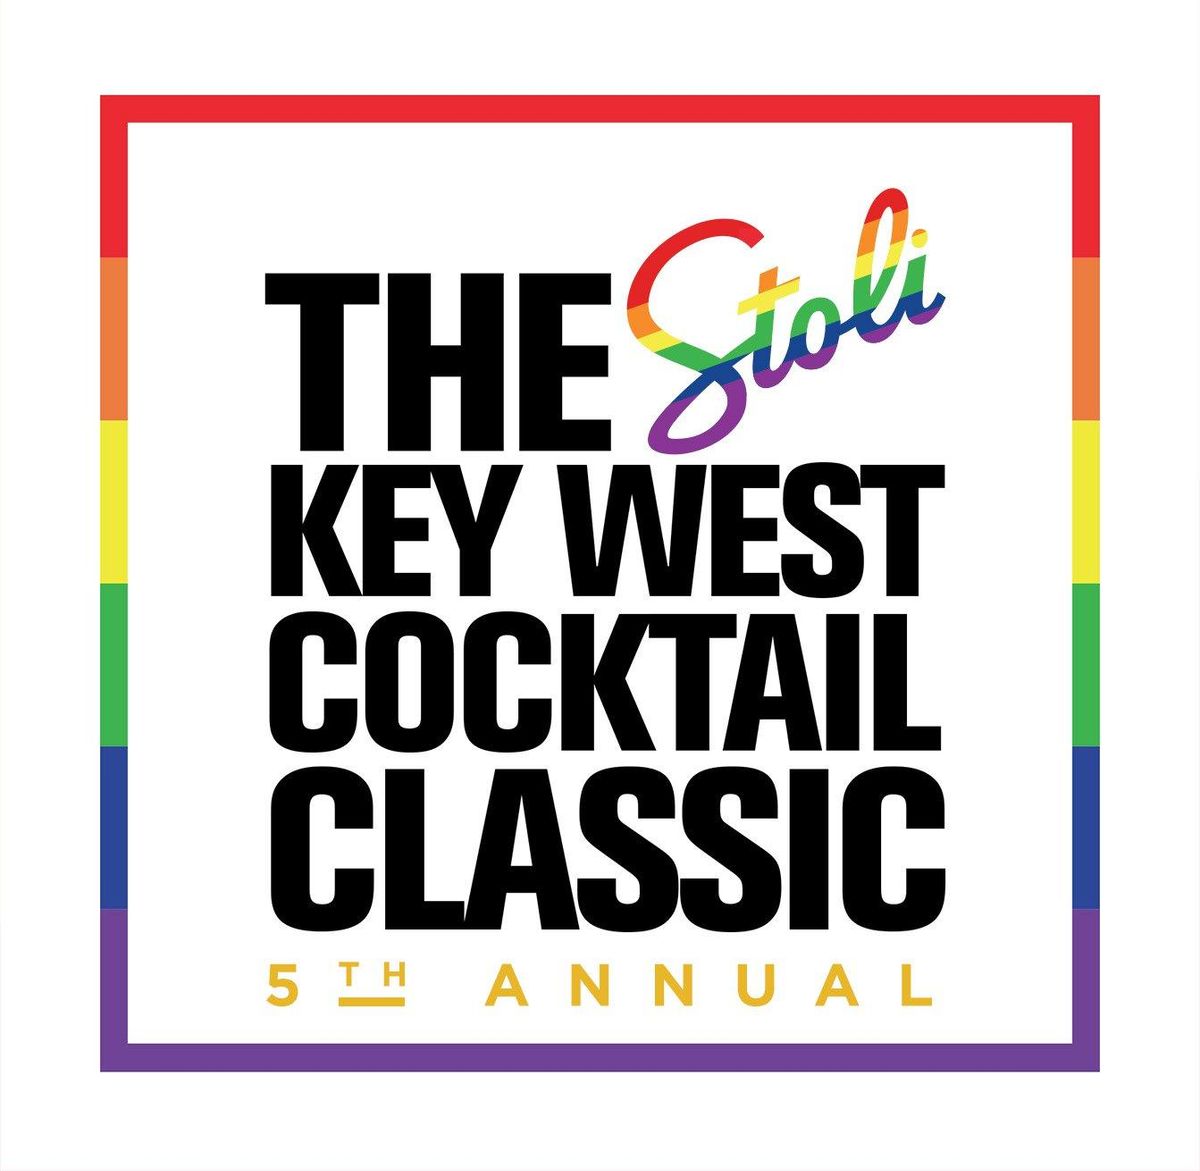 
RSVP for the Stoli Key West Cocktail Classic Competition & Show in Montreal
